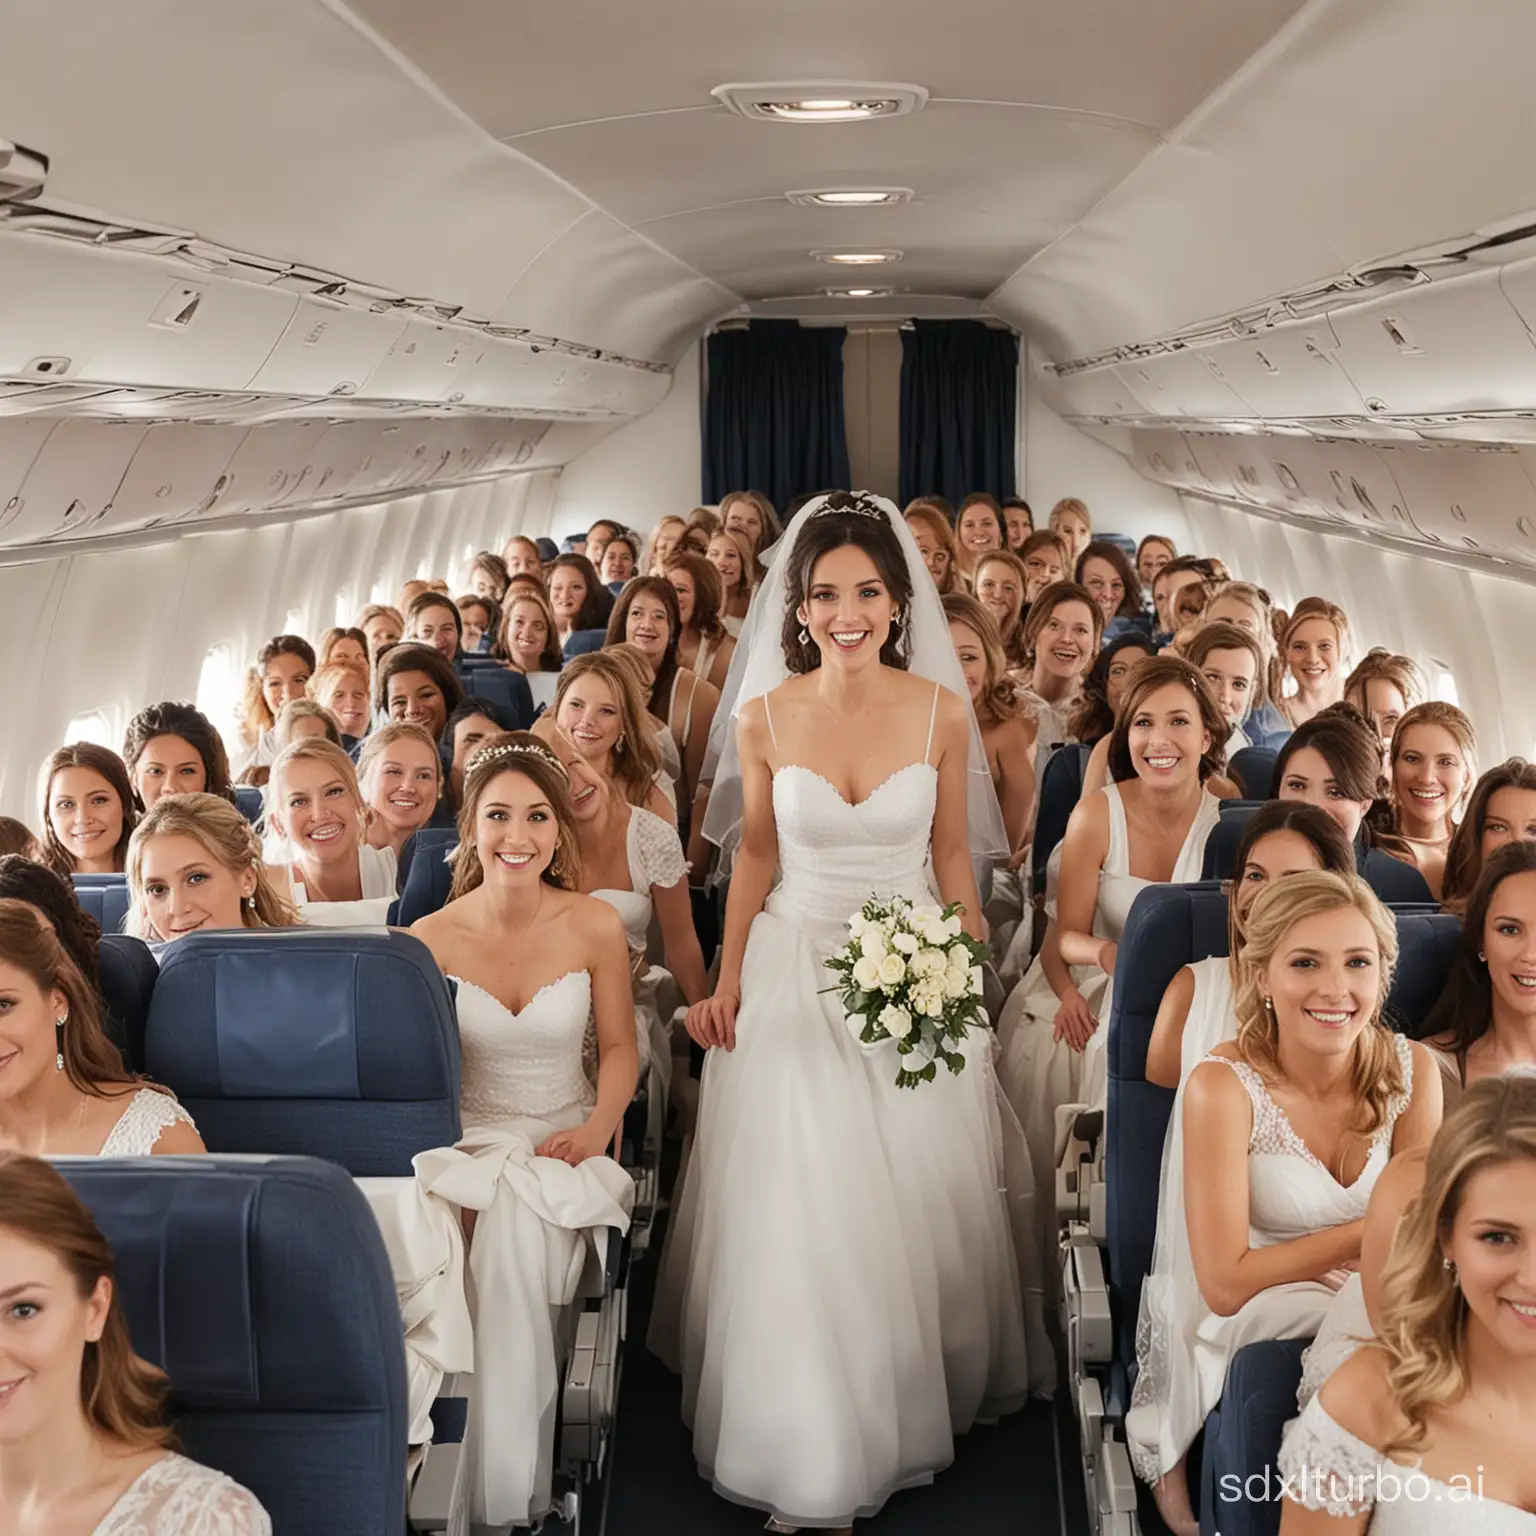 Crowd of brides on the plane